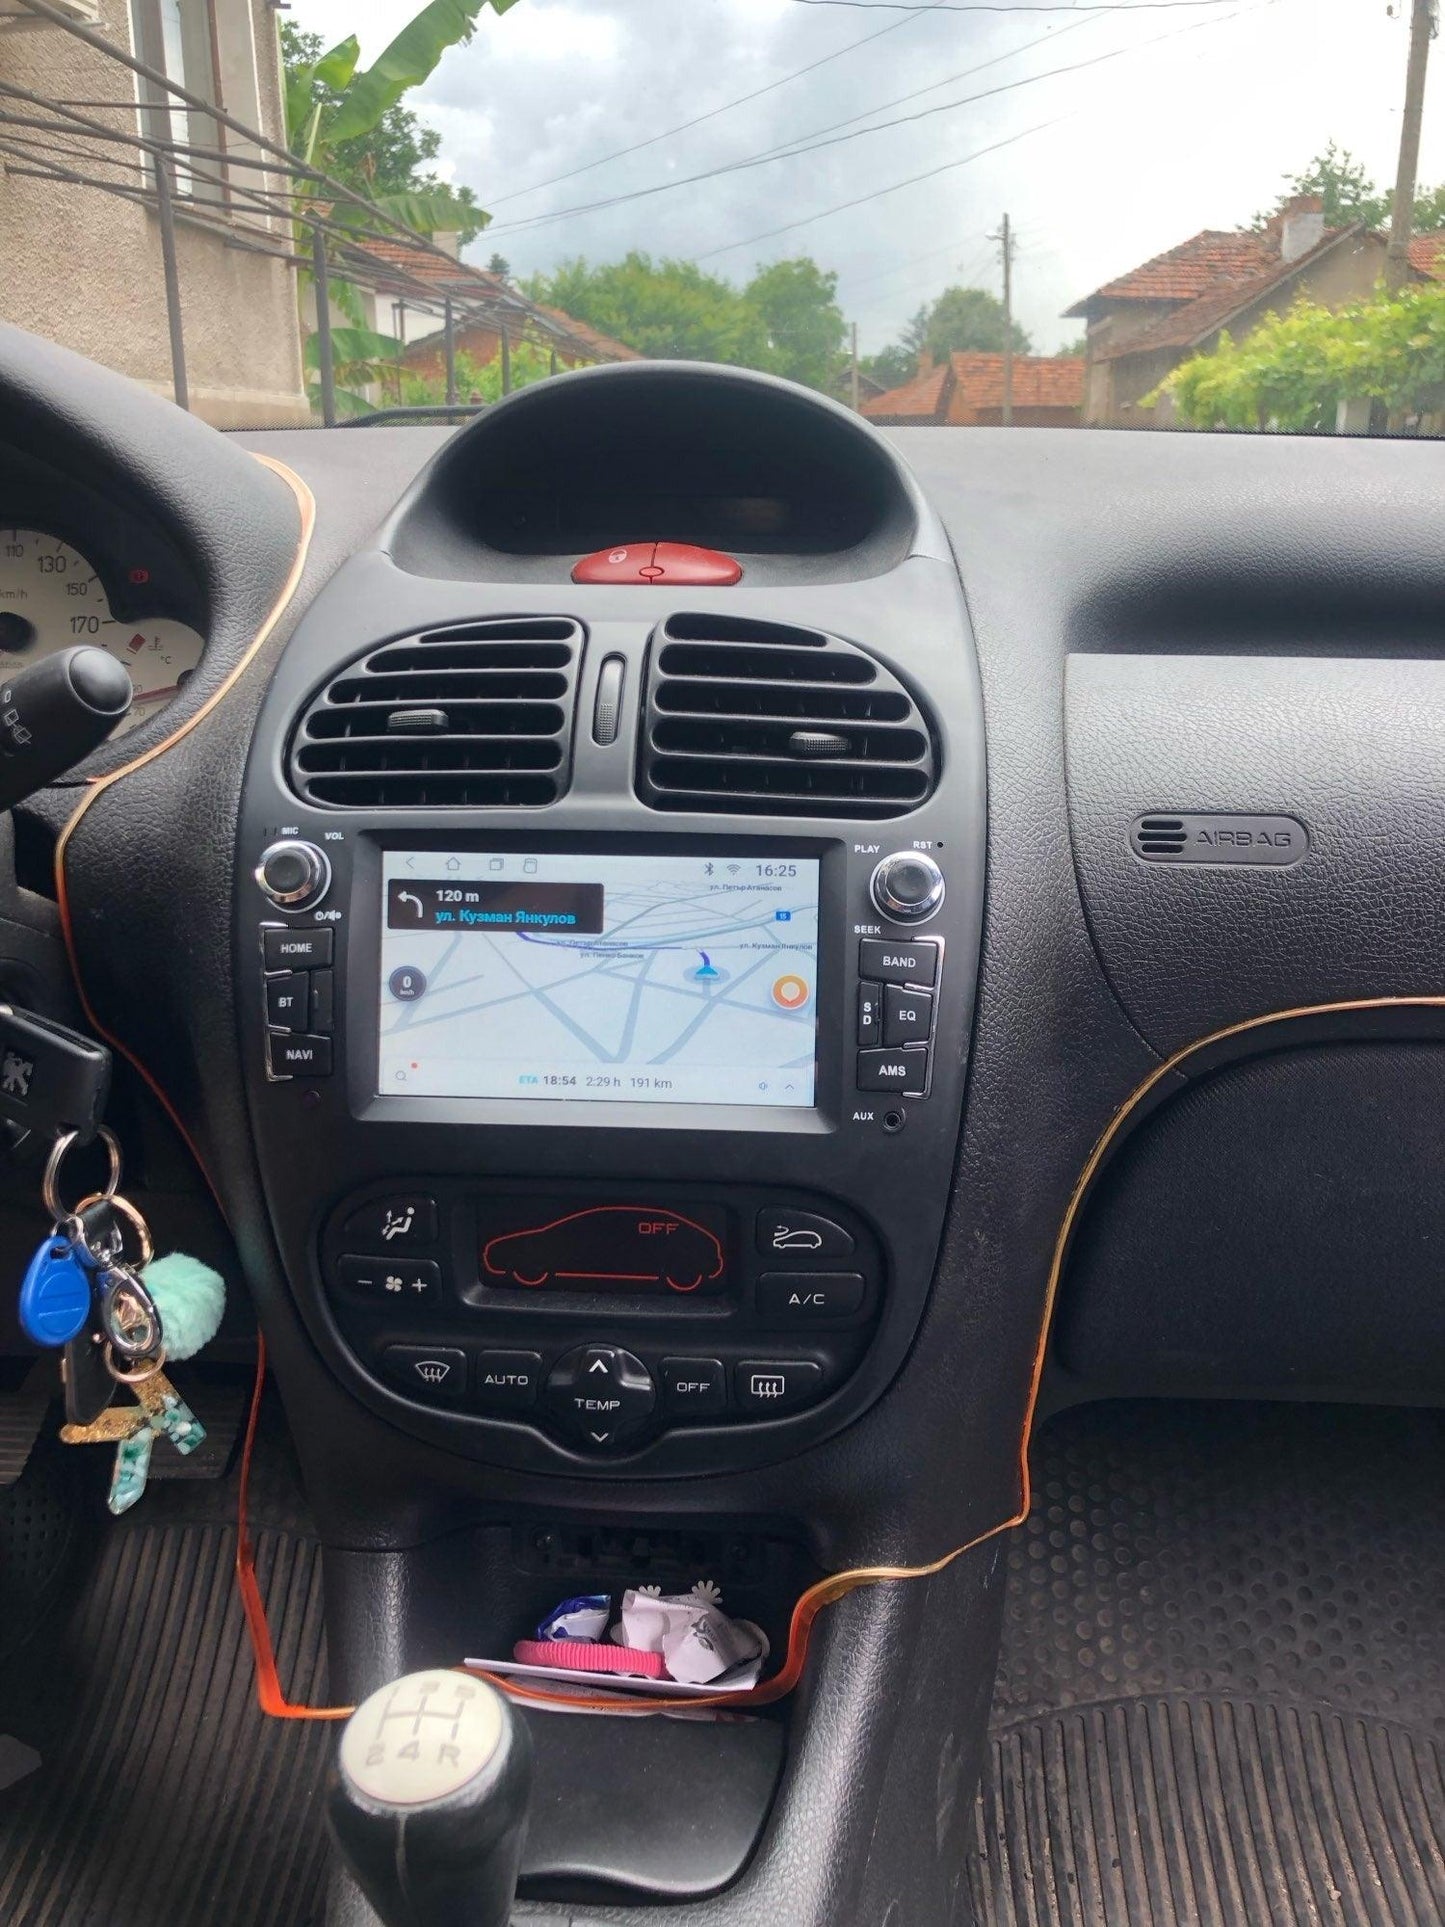 Special head unit for Peugeot 206 with GPS ANDROID TR2817